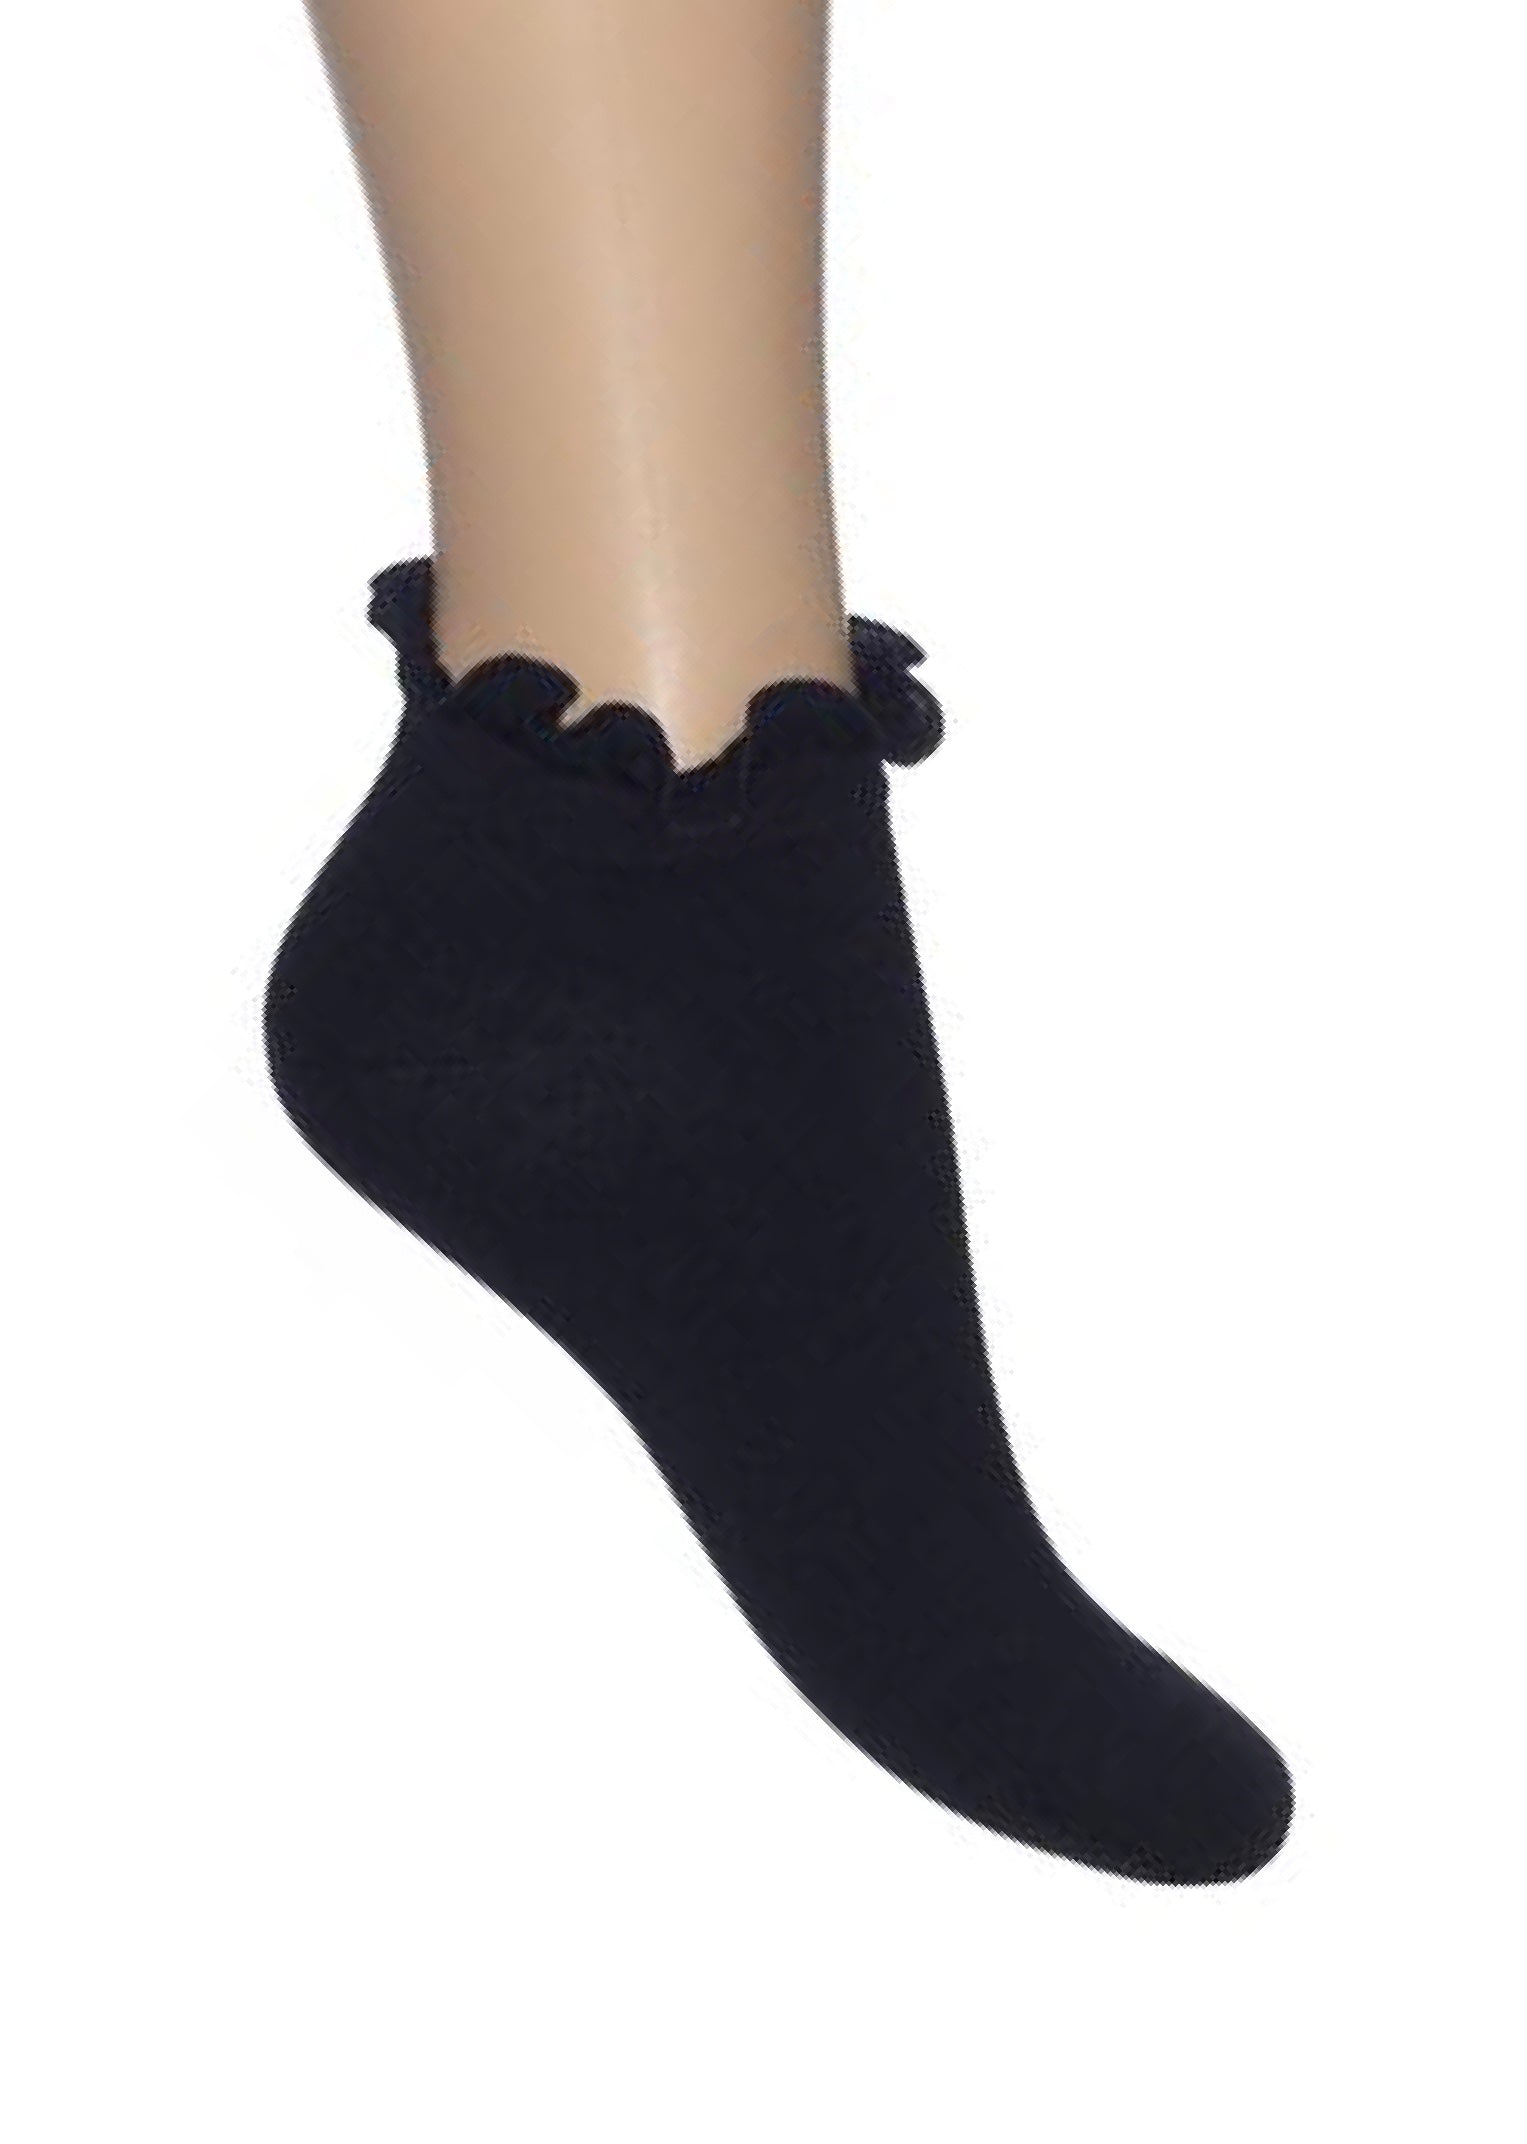 Bonnie Doon BN34.10.19 Lettuce Sock - black low rise cotton ankle socks with frill cuff